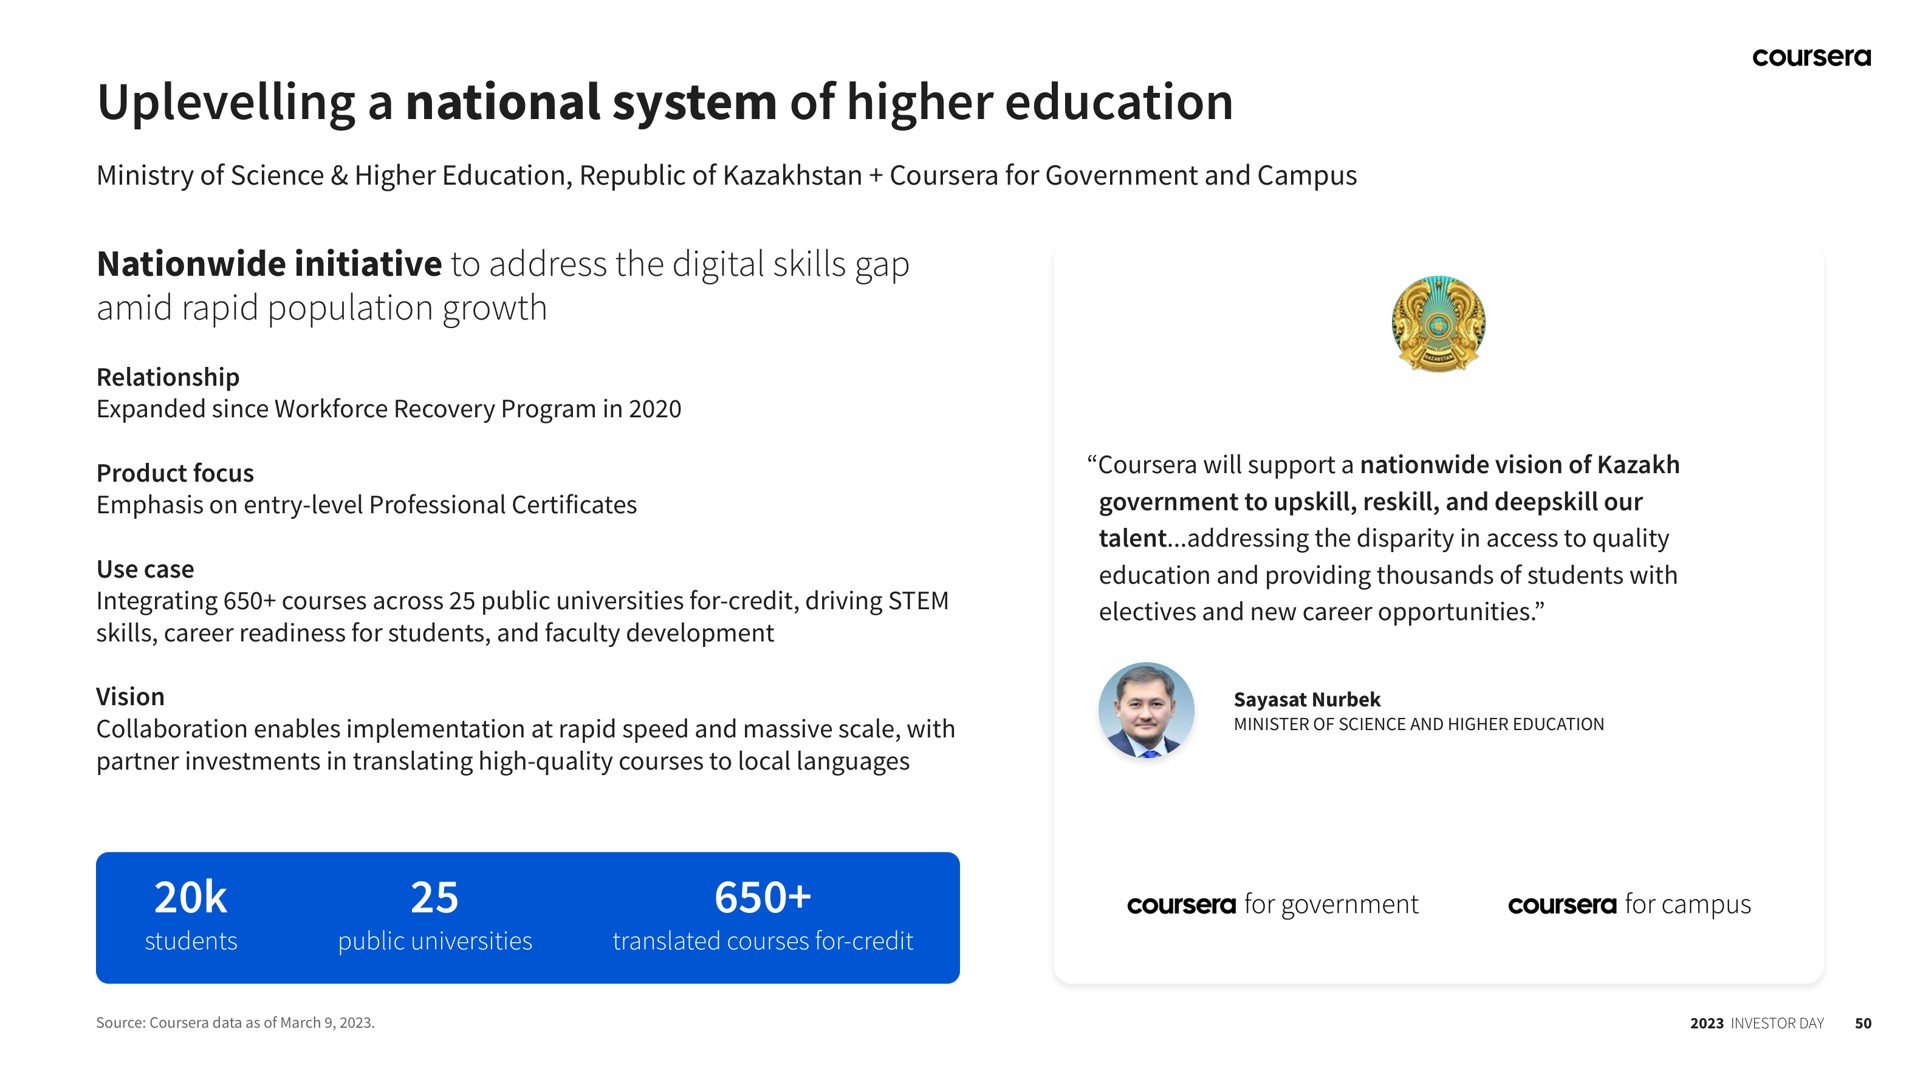 a national system of higher education | Coursera